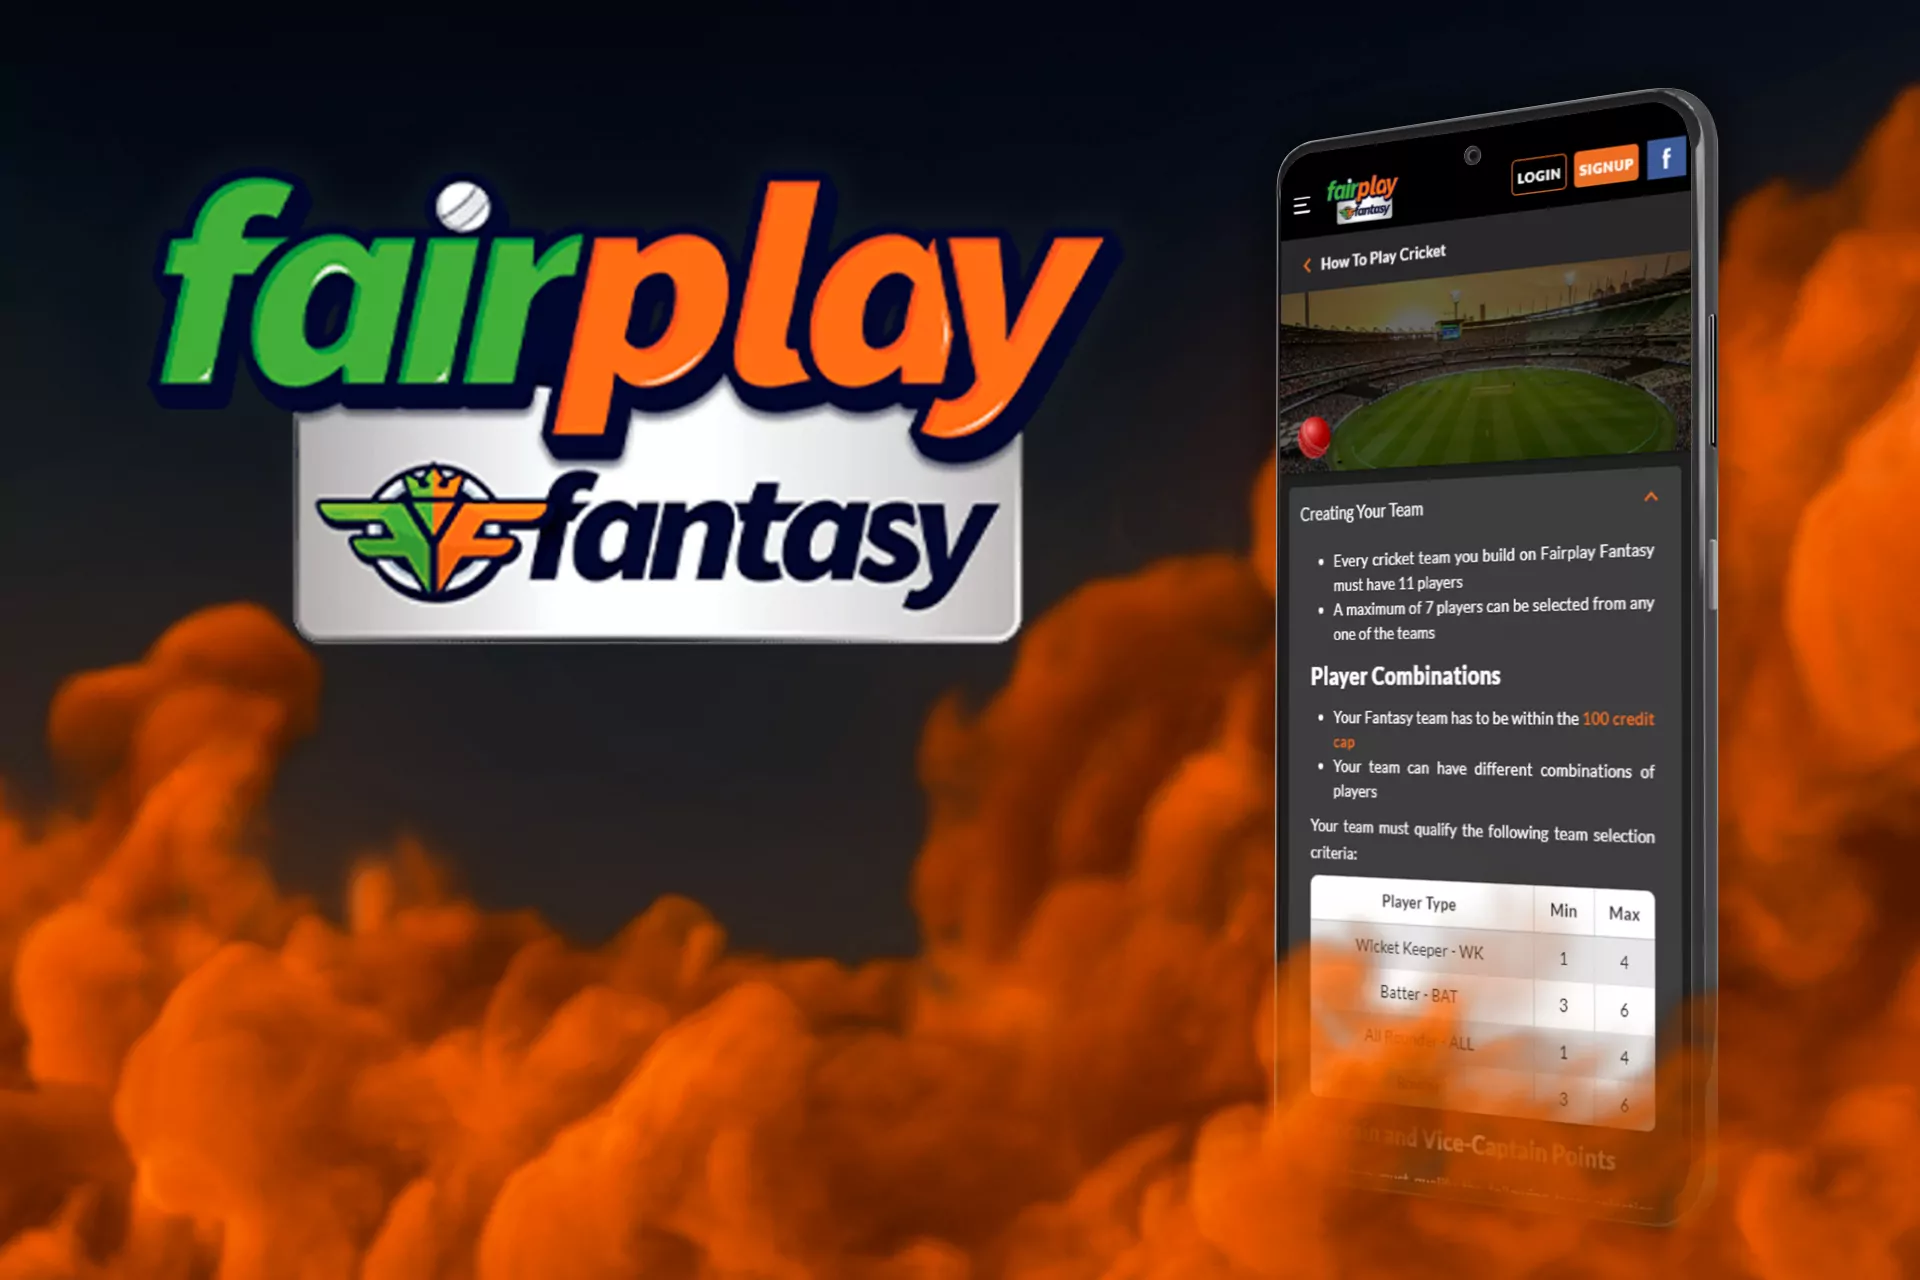 Play fantasy sports online in the Fairplay app.